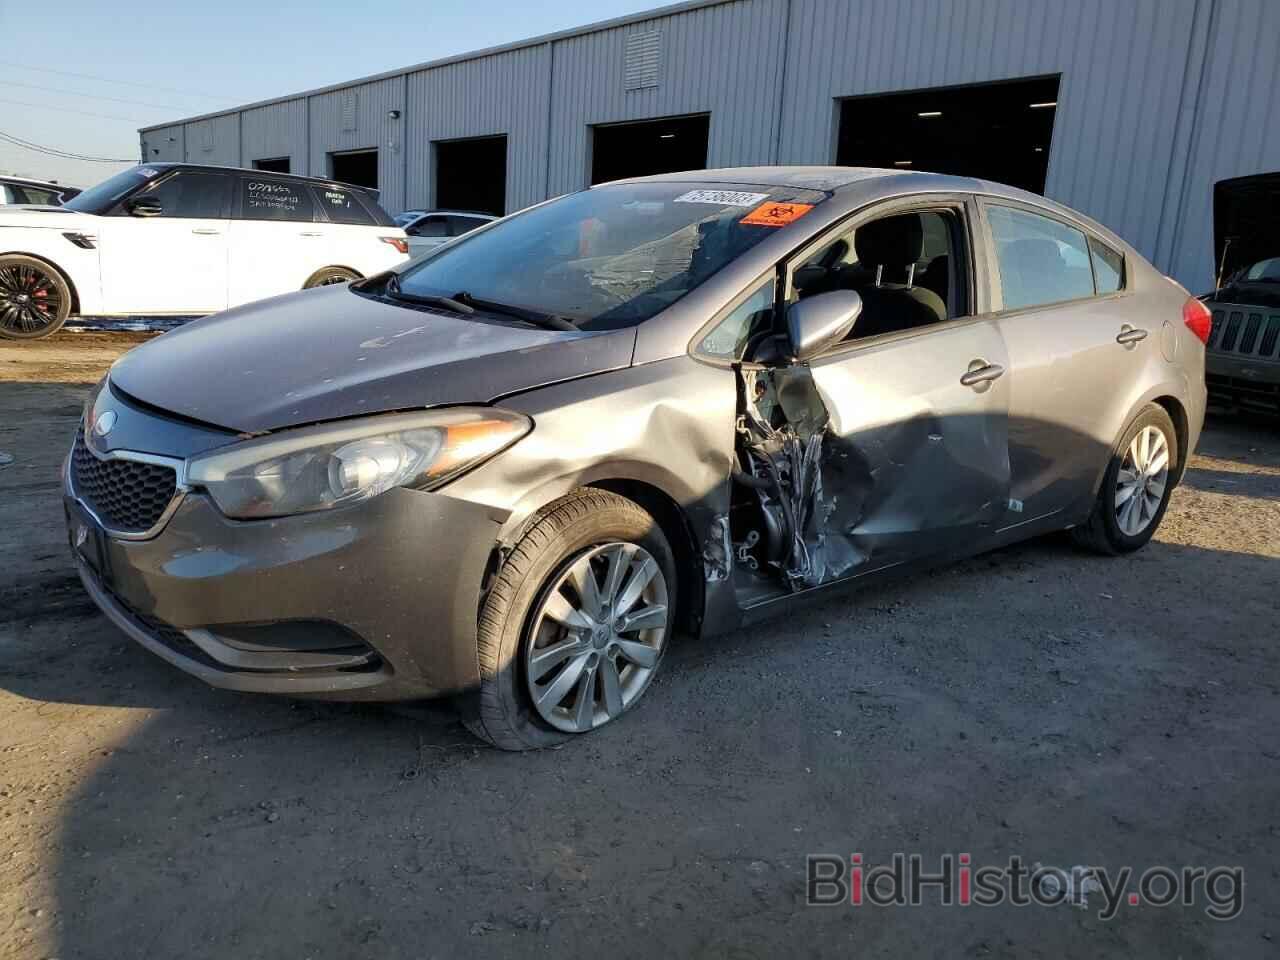 Report KNAFX4A62G5439159 KIA FORTE 2016 GRAY GAS - price and damage history